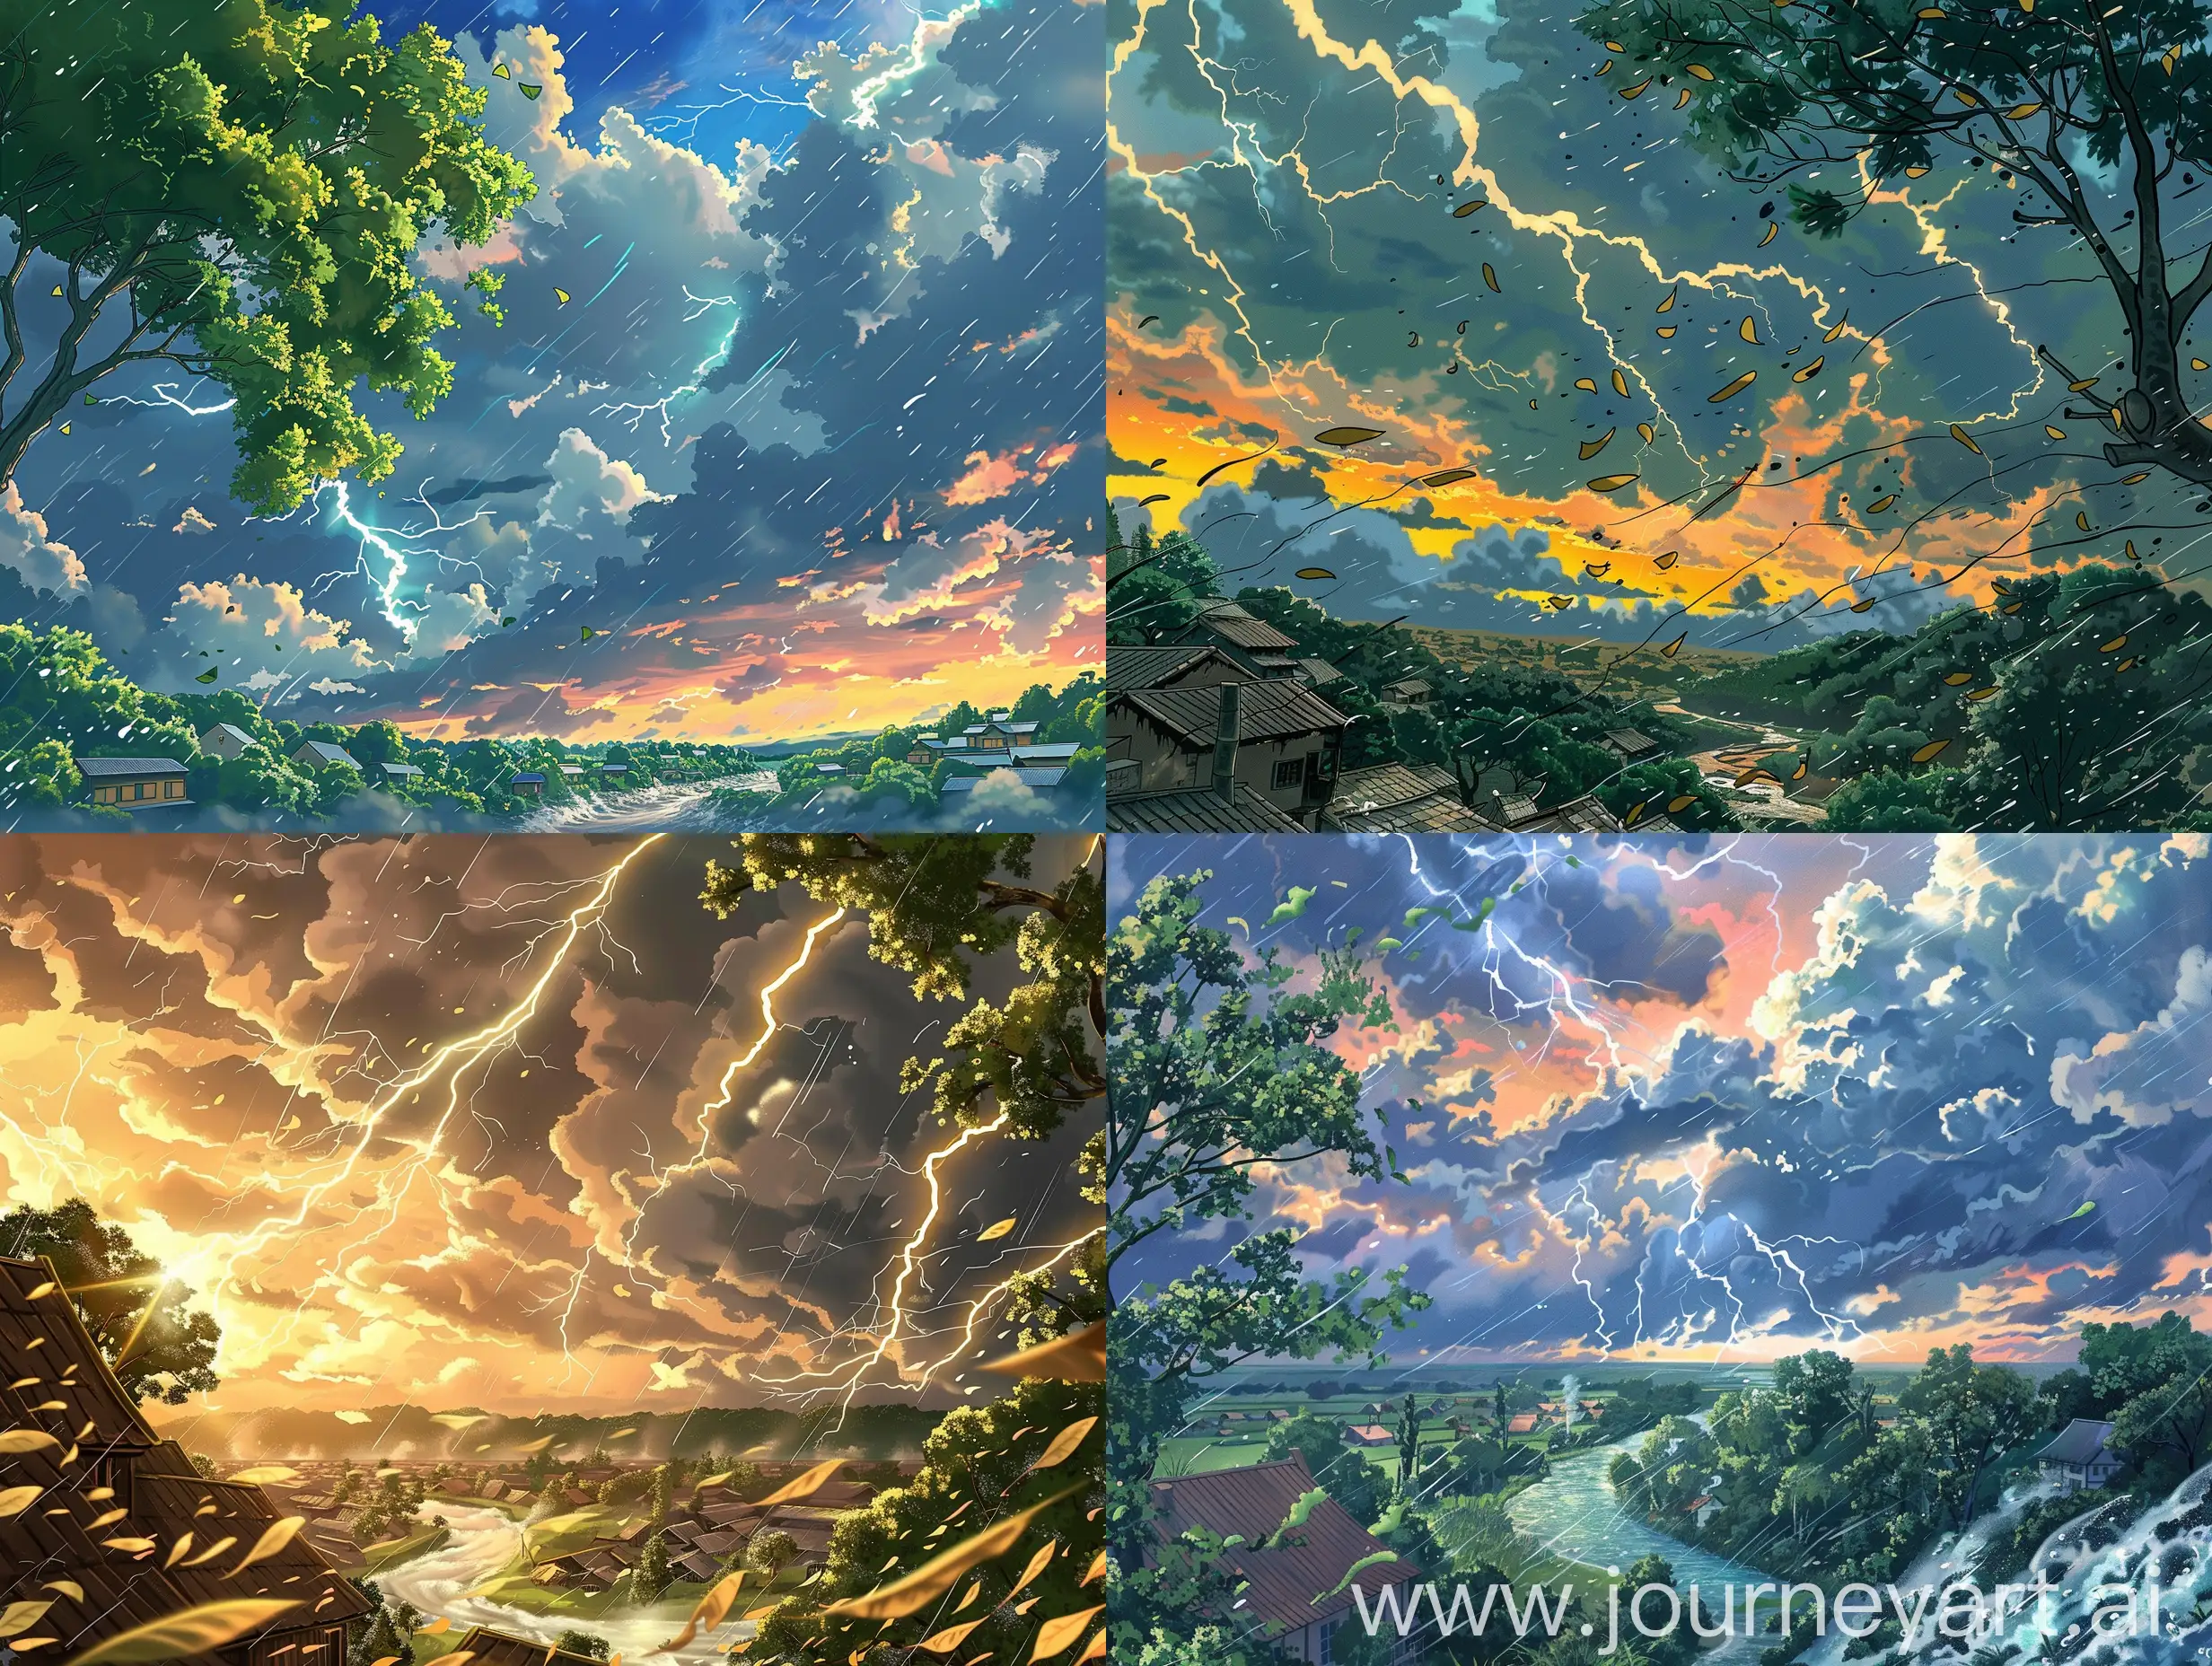 Lightning sparks move through the heavy clouds in the sky.  The wind moves the tree leaves, an atmosphere like sunset but the sun does not appear because of the clouds, thunder, anime style, creative, village, nature, a raging river moved quickly by the wind, landscape.